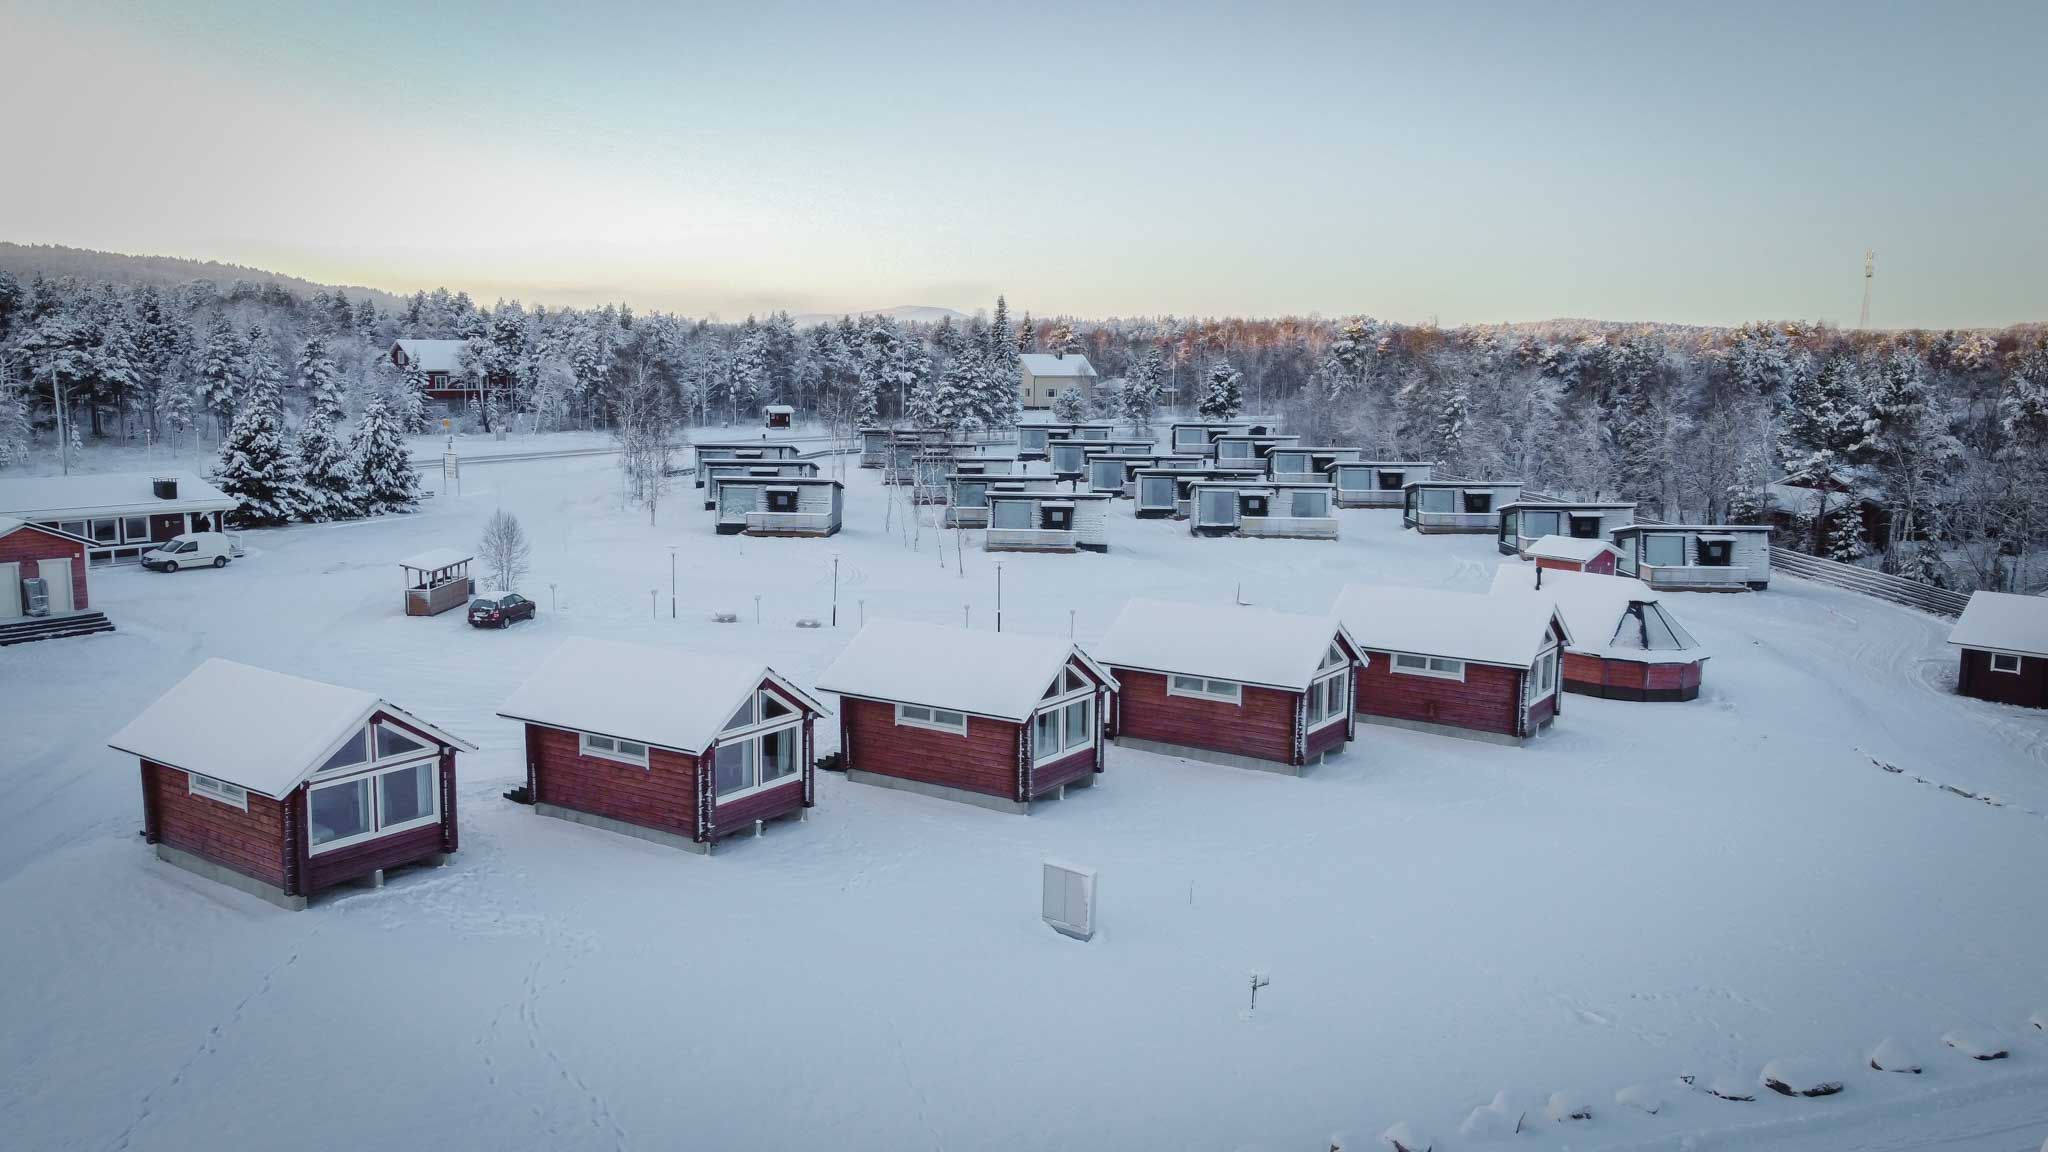 Aerial photo of Holiday Village Inari in Lapland Finland during winter.